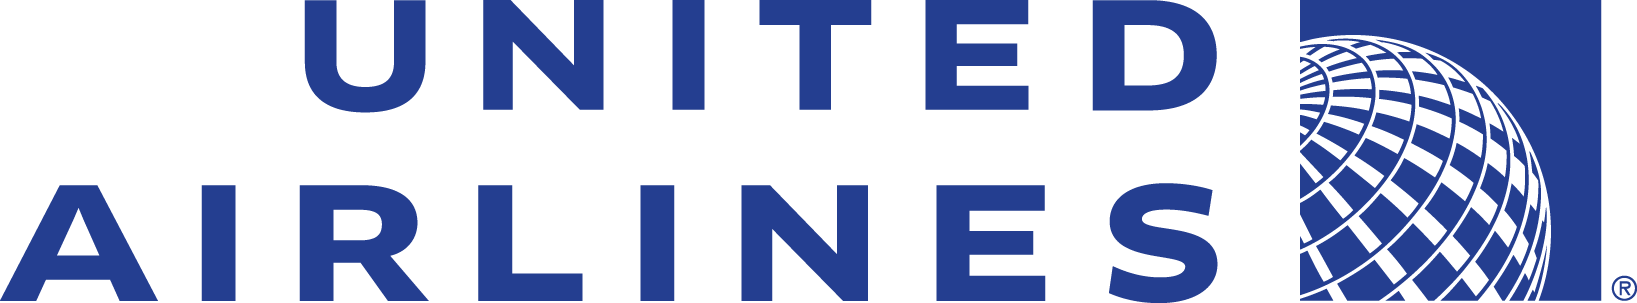 United Airlines Logo Png Transparent United Airlines Logopng Images